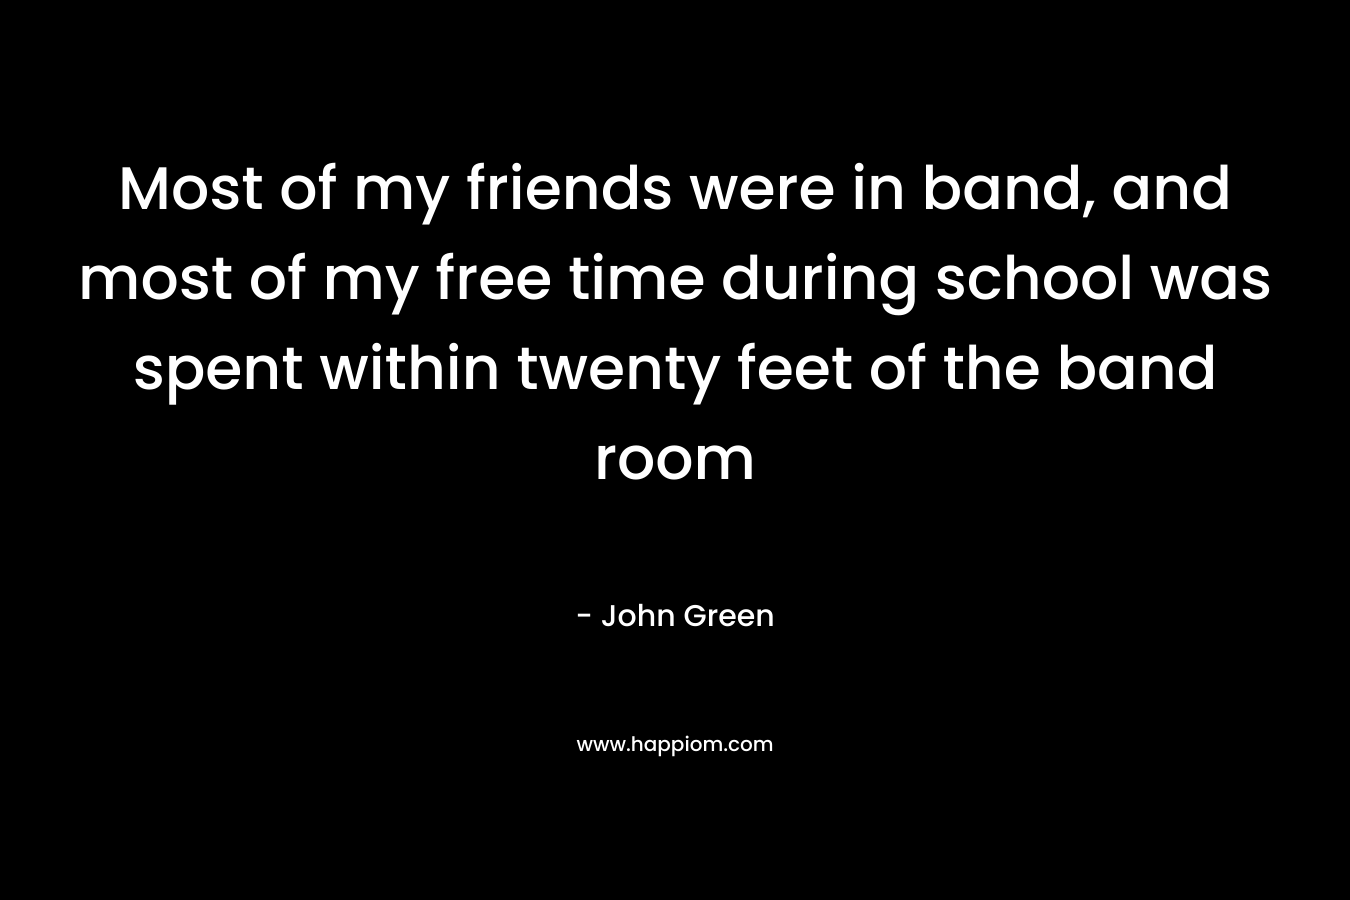 Most of my friends were in band, and most of my free time during school was spent within twenty feet of the band room